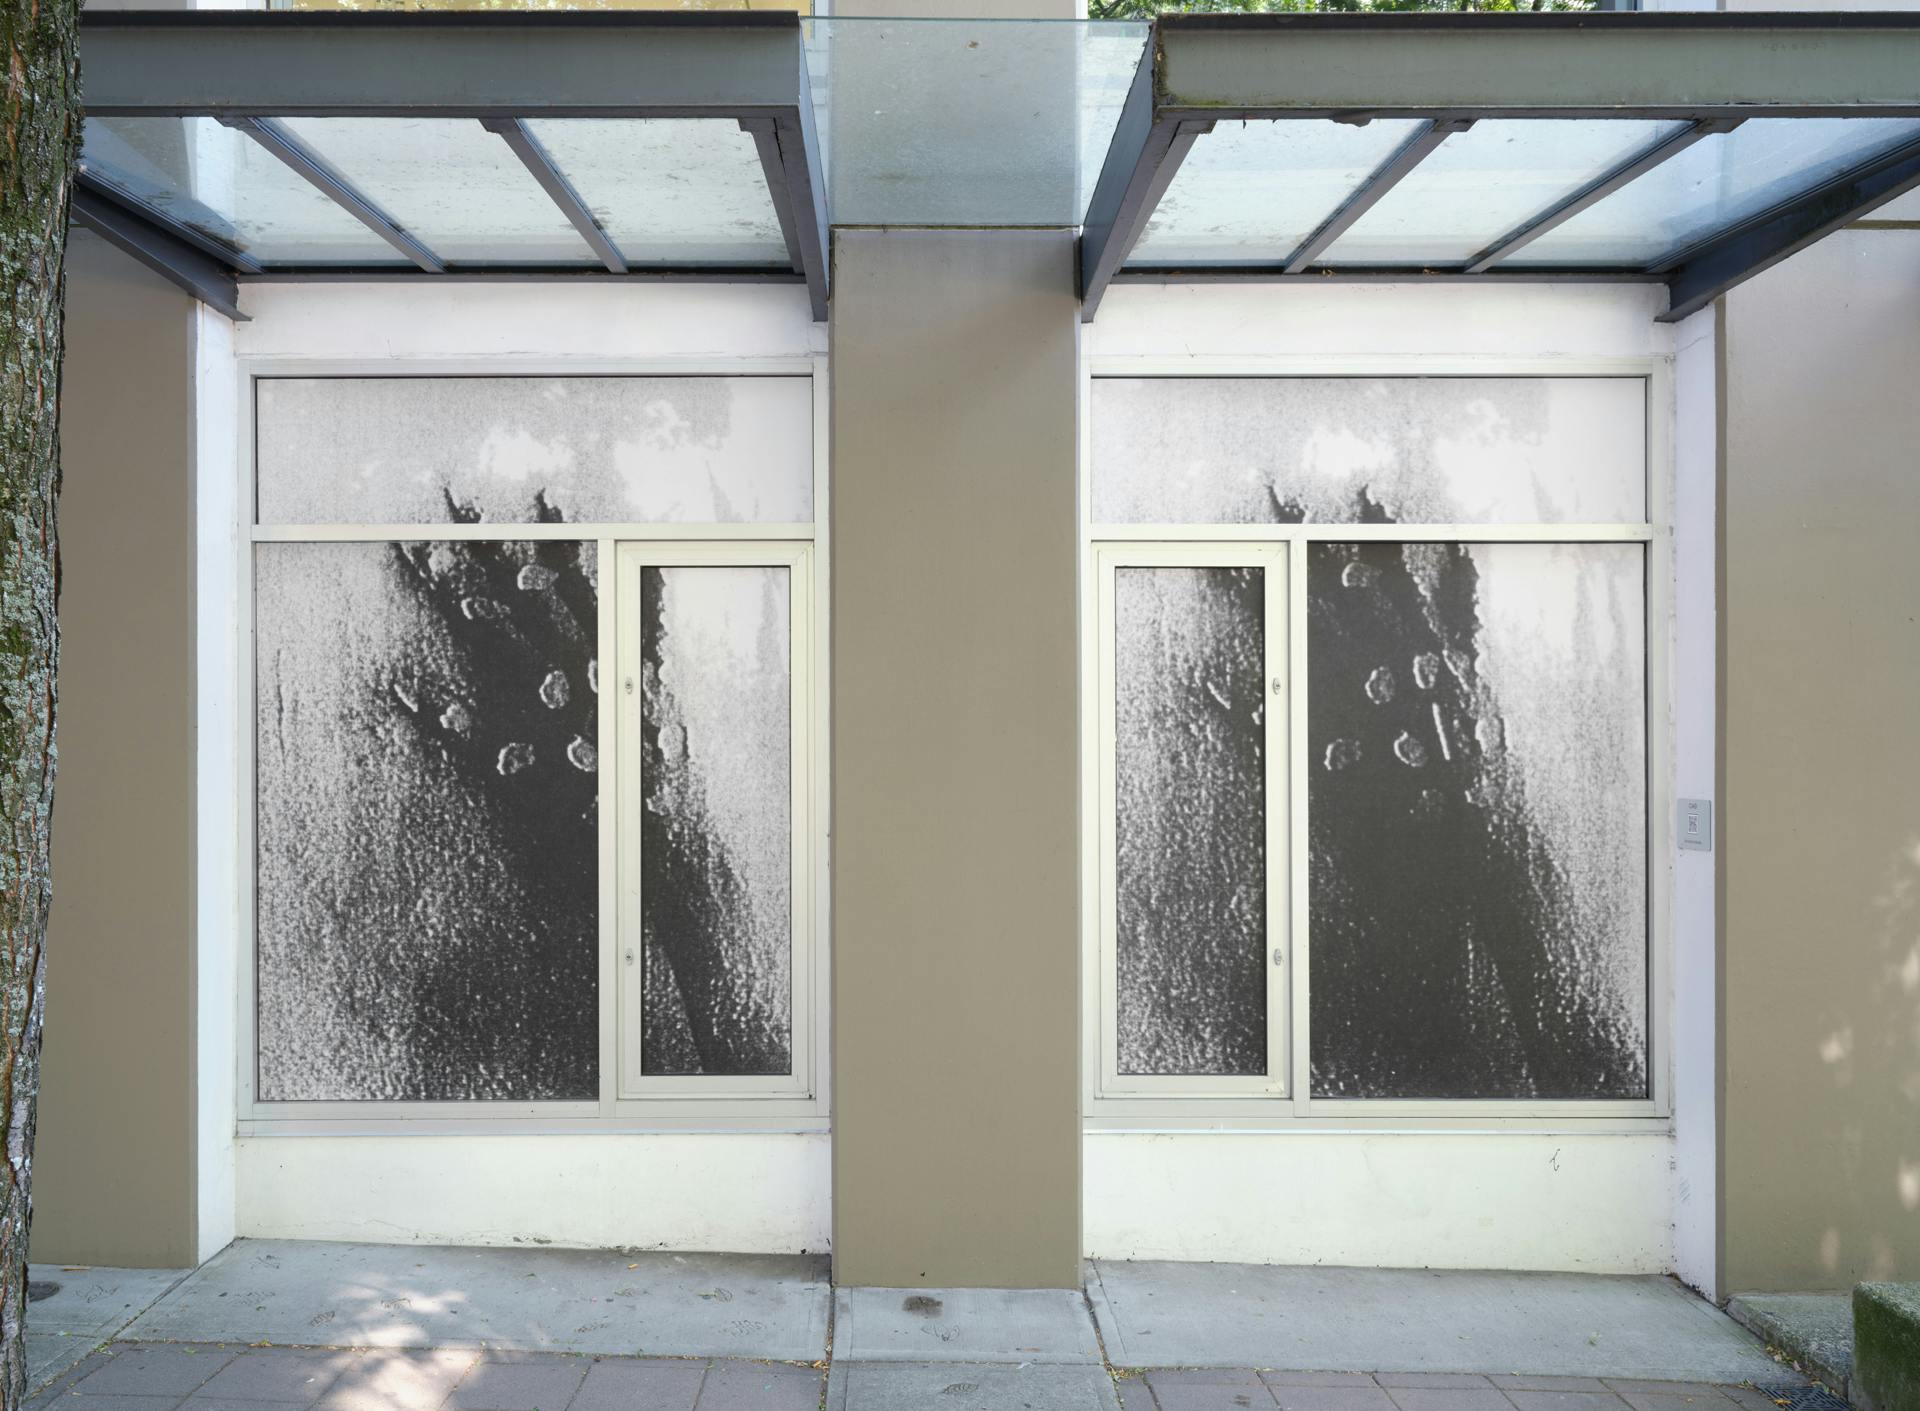 A pair of windows featuring a pair of images depicting a hand with small white pebbles placed on its joints. Both images are significantly darker than is optimum, with the right image darker than the left one. The image is difficult to make out.